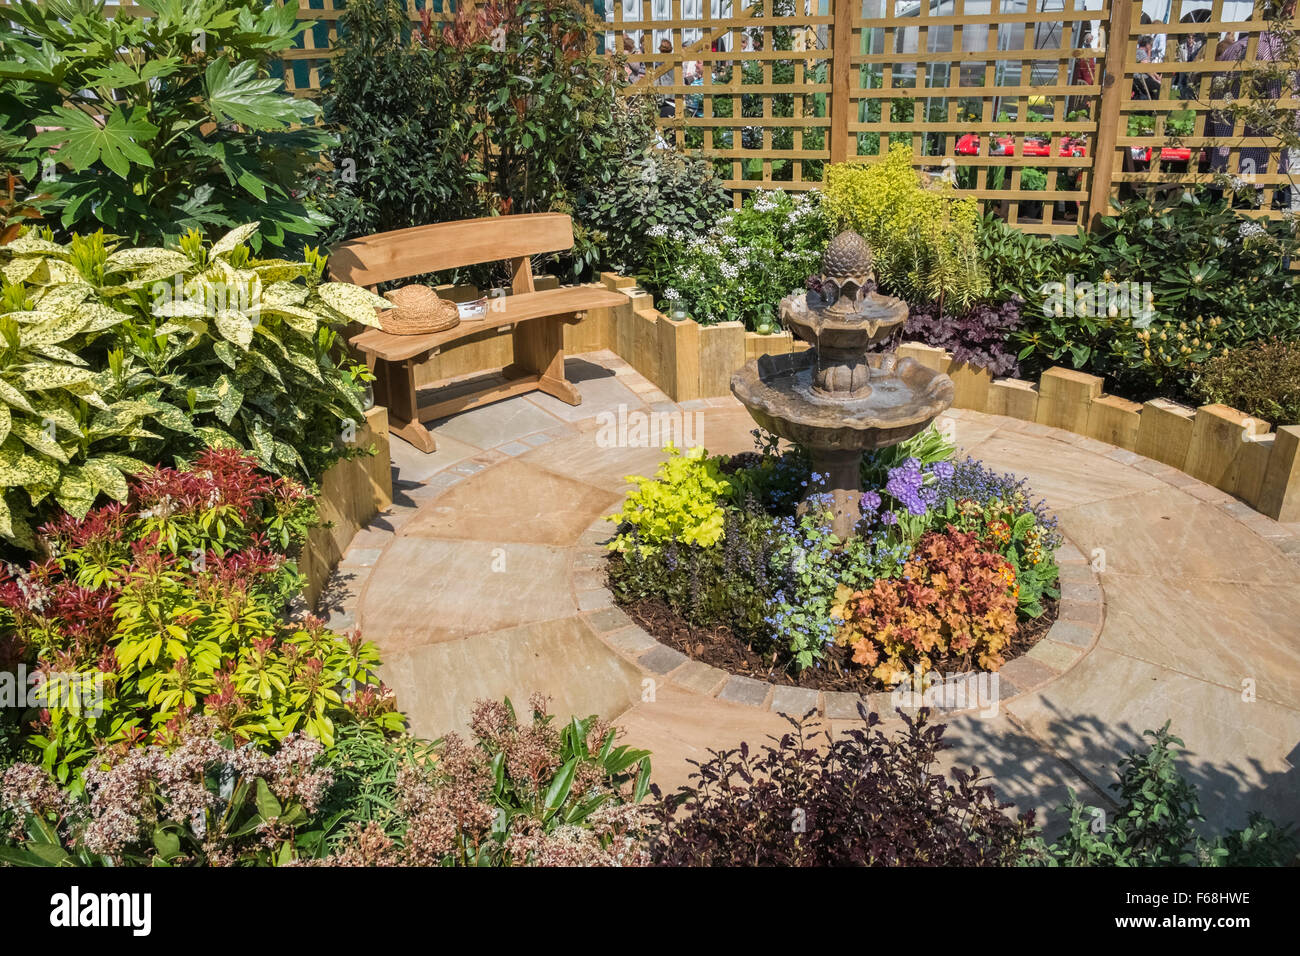 garden with seating area designed for a small space stock photo